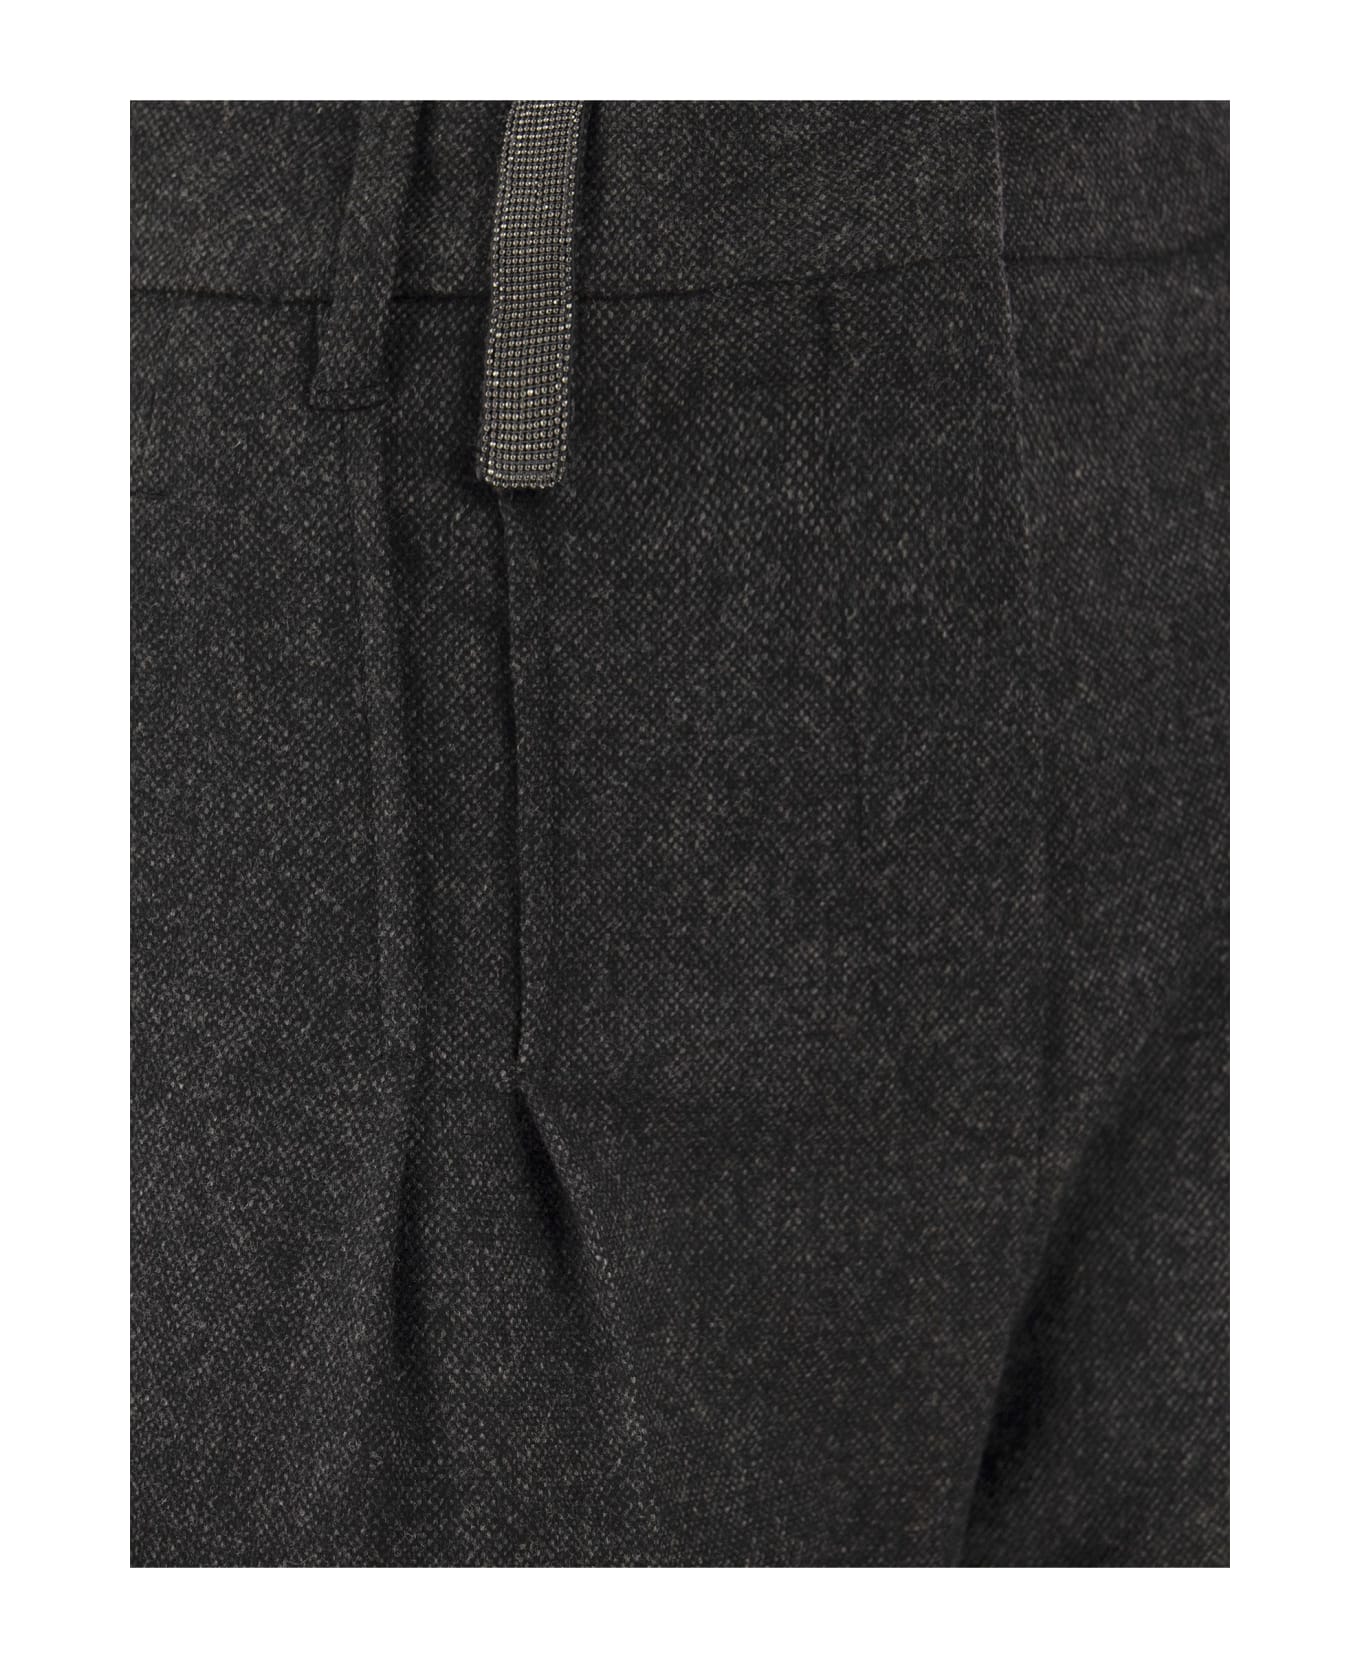 Brunello Cucinelli Sartoria Wool And Cashmere Trousers - Grey ボトムス